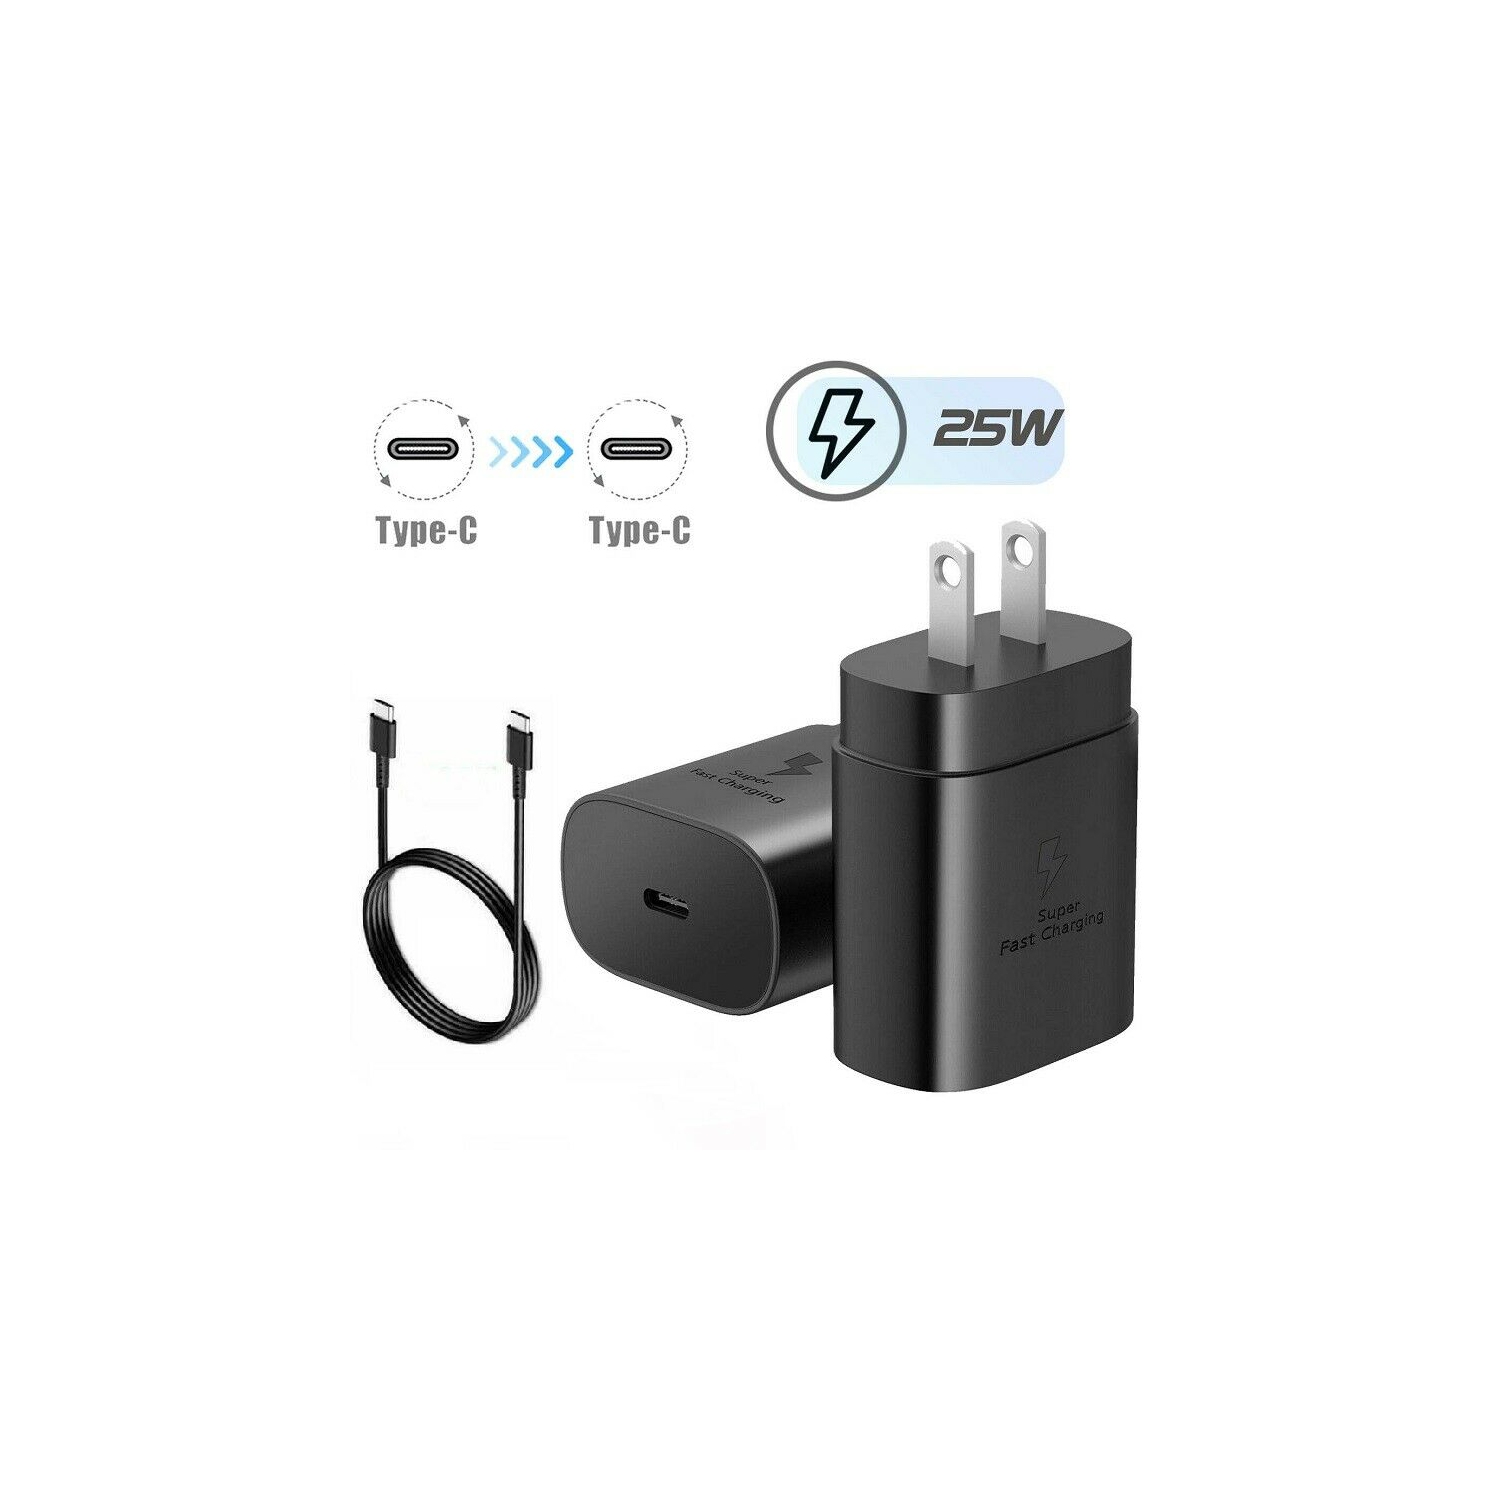 LIPTO - 25W Samsung USB-C 3.0A Fast Charging Wall Charger Adapter + 1m Type-C Cable for Galaxy S9 S10 S20 Note 9 10 Plus, Black